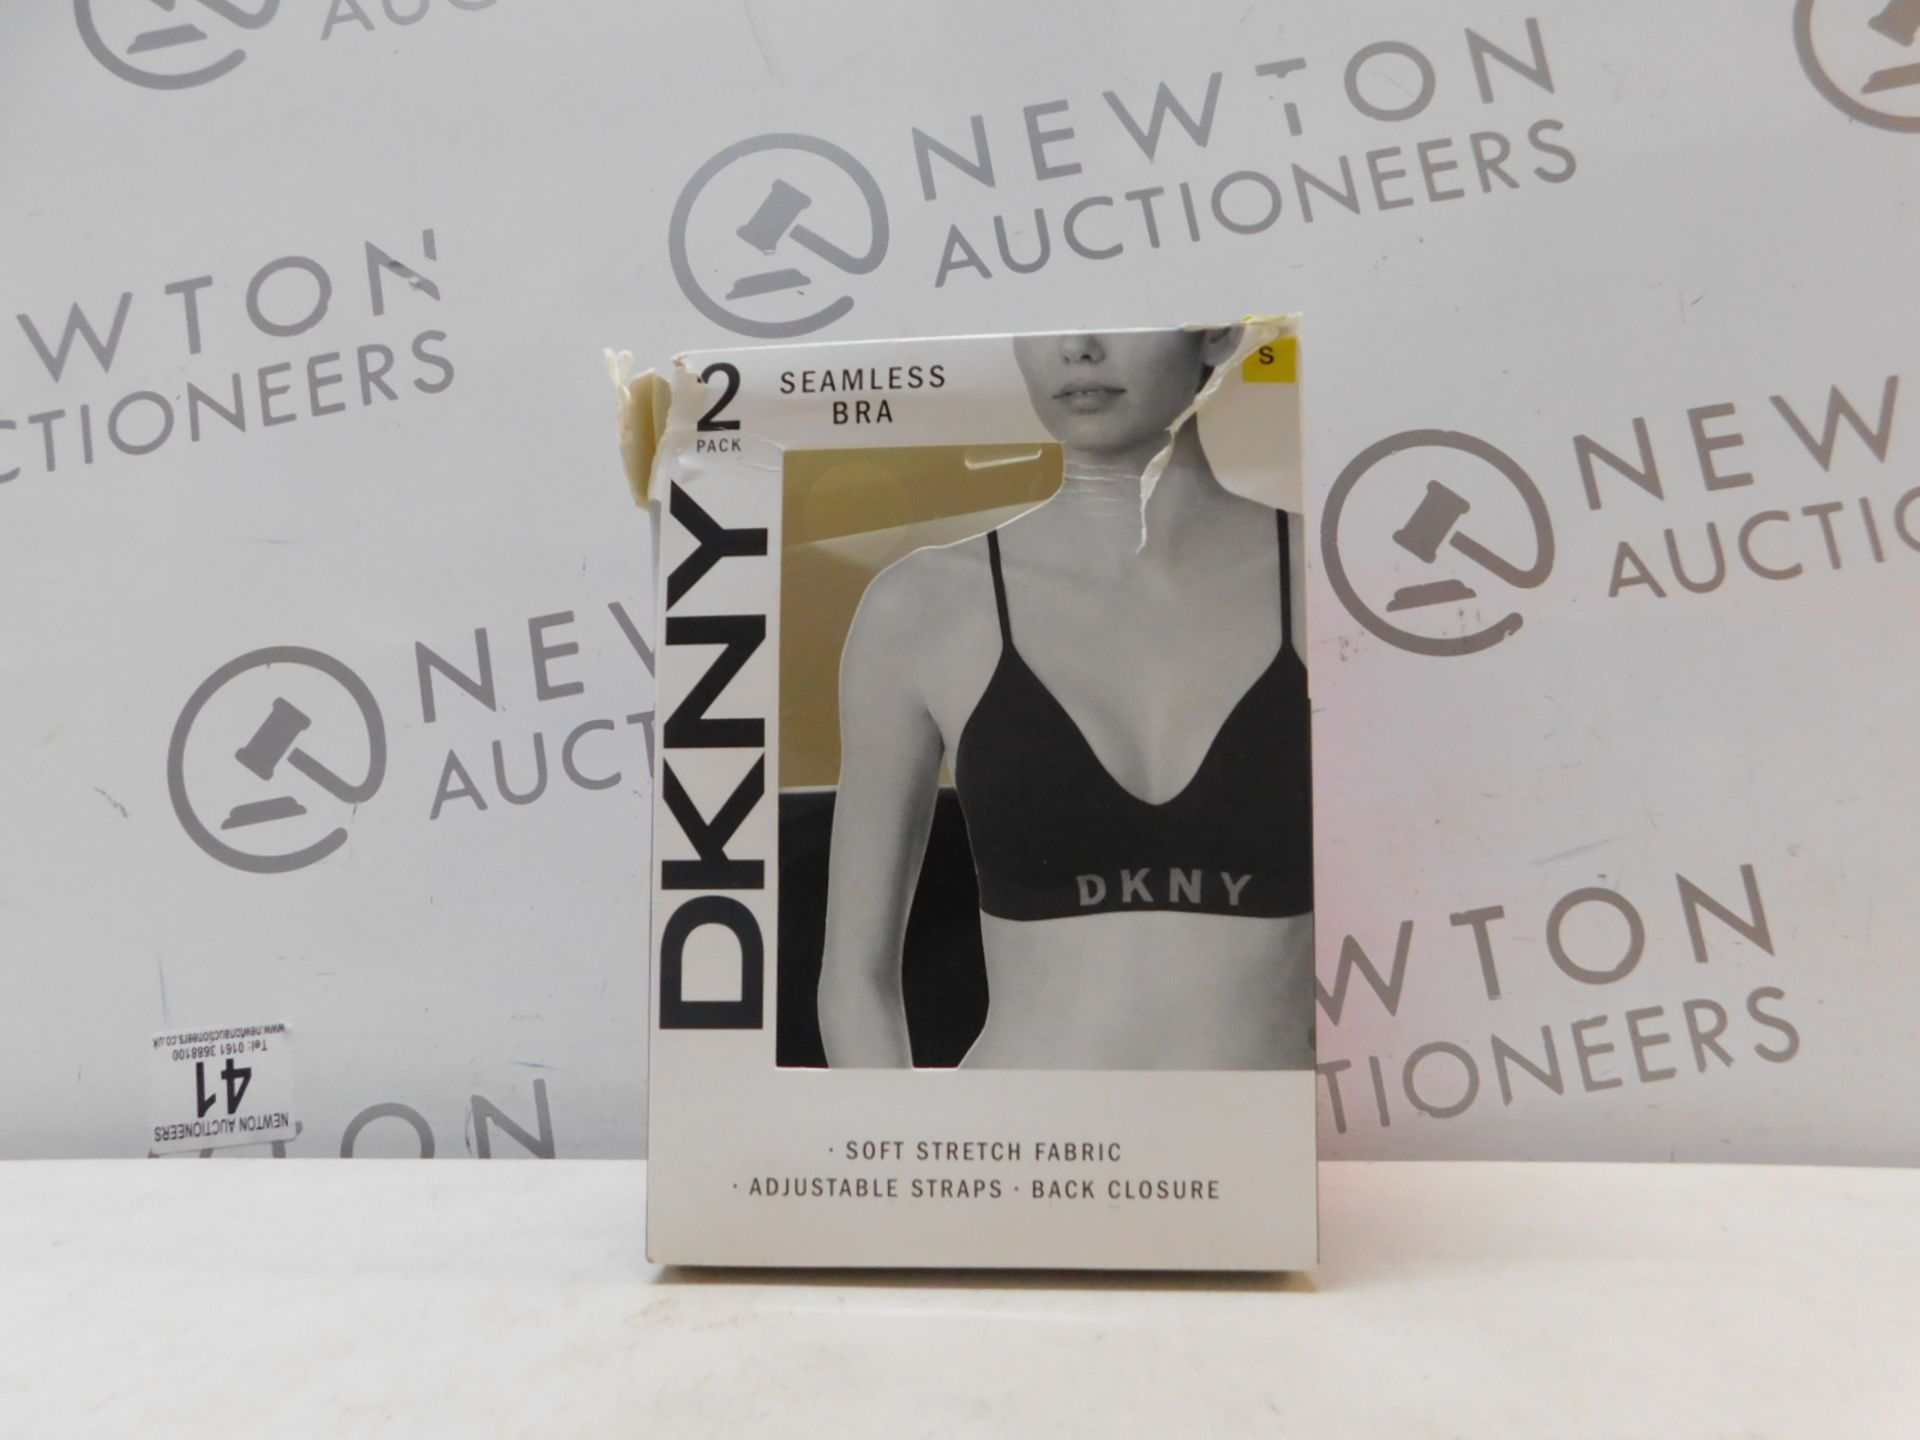 1 BOXED DKNY SEAMLESS BRA SIZE LARGE RRP Â£49.99 (1 IN THE BOX)